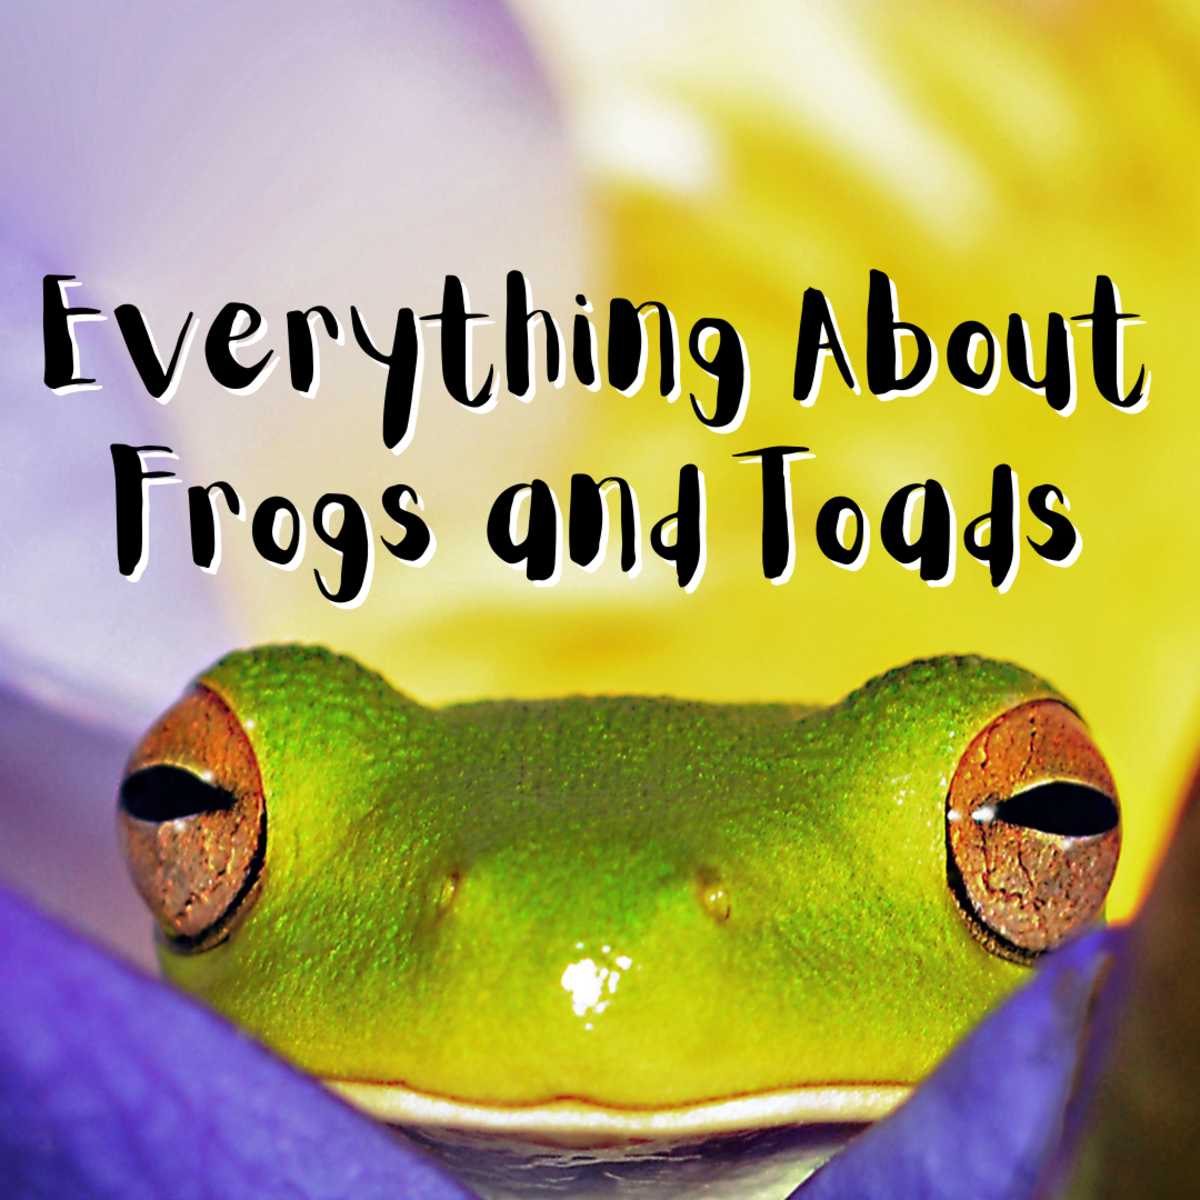 This article discusses a plethora of interesting info on frogs and toads, including their croaks, habitats, diets, and more!